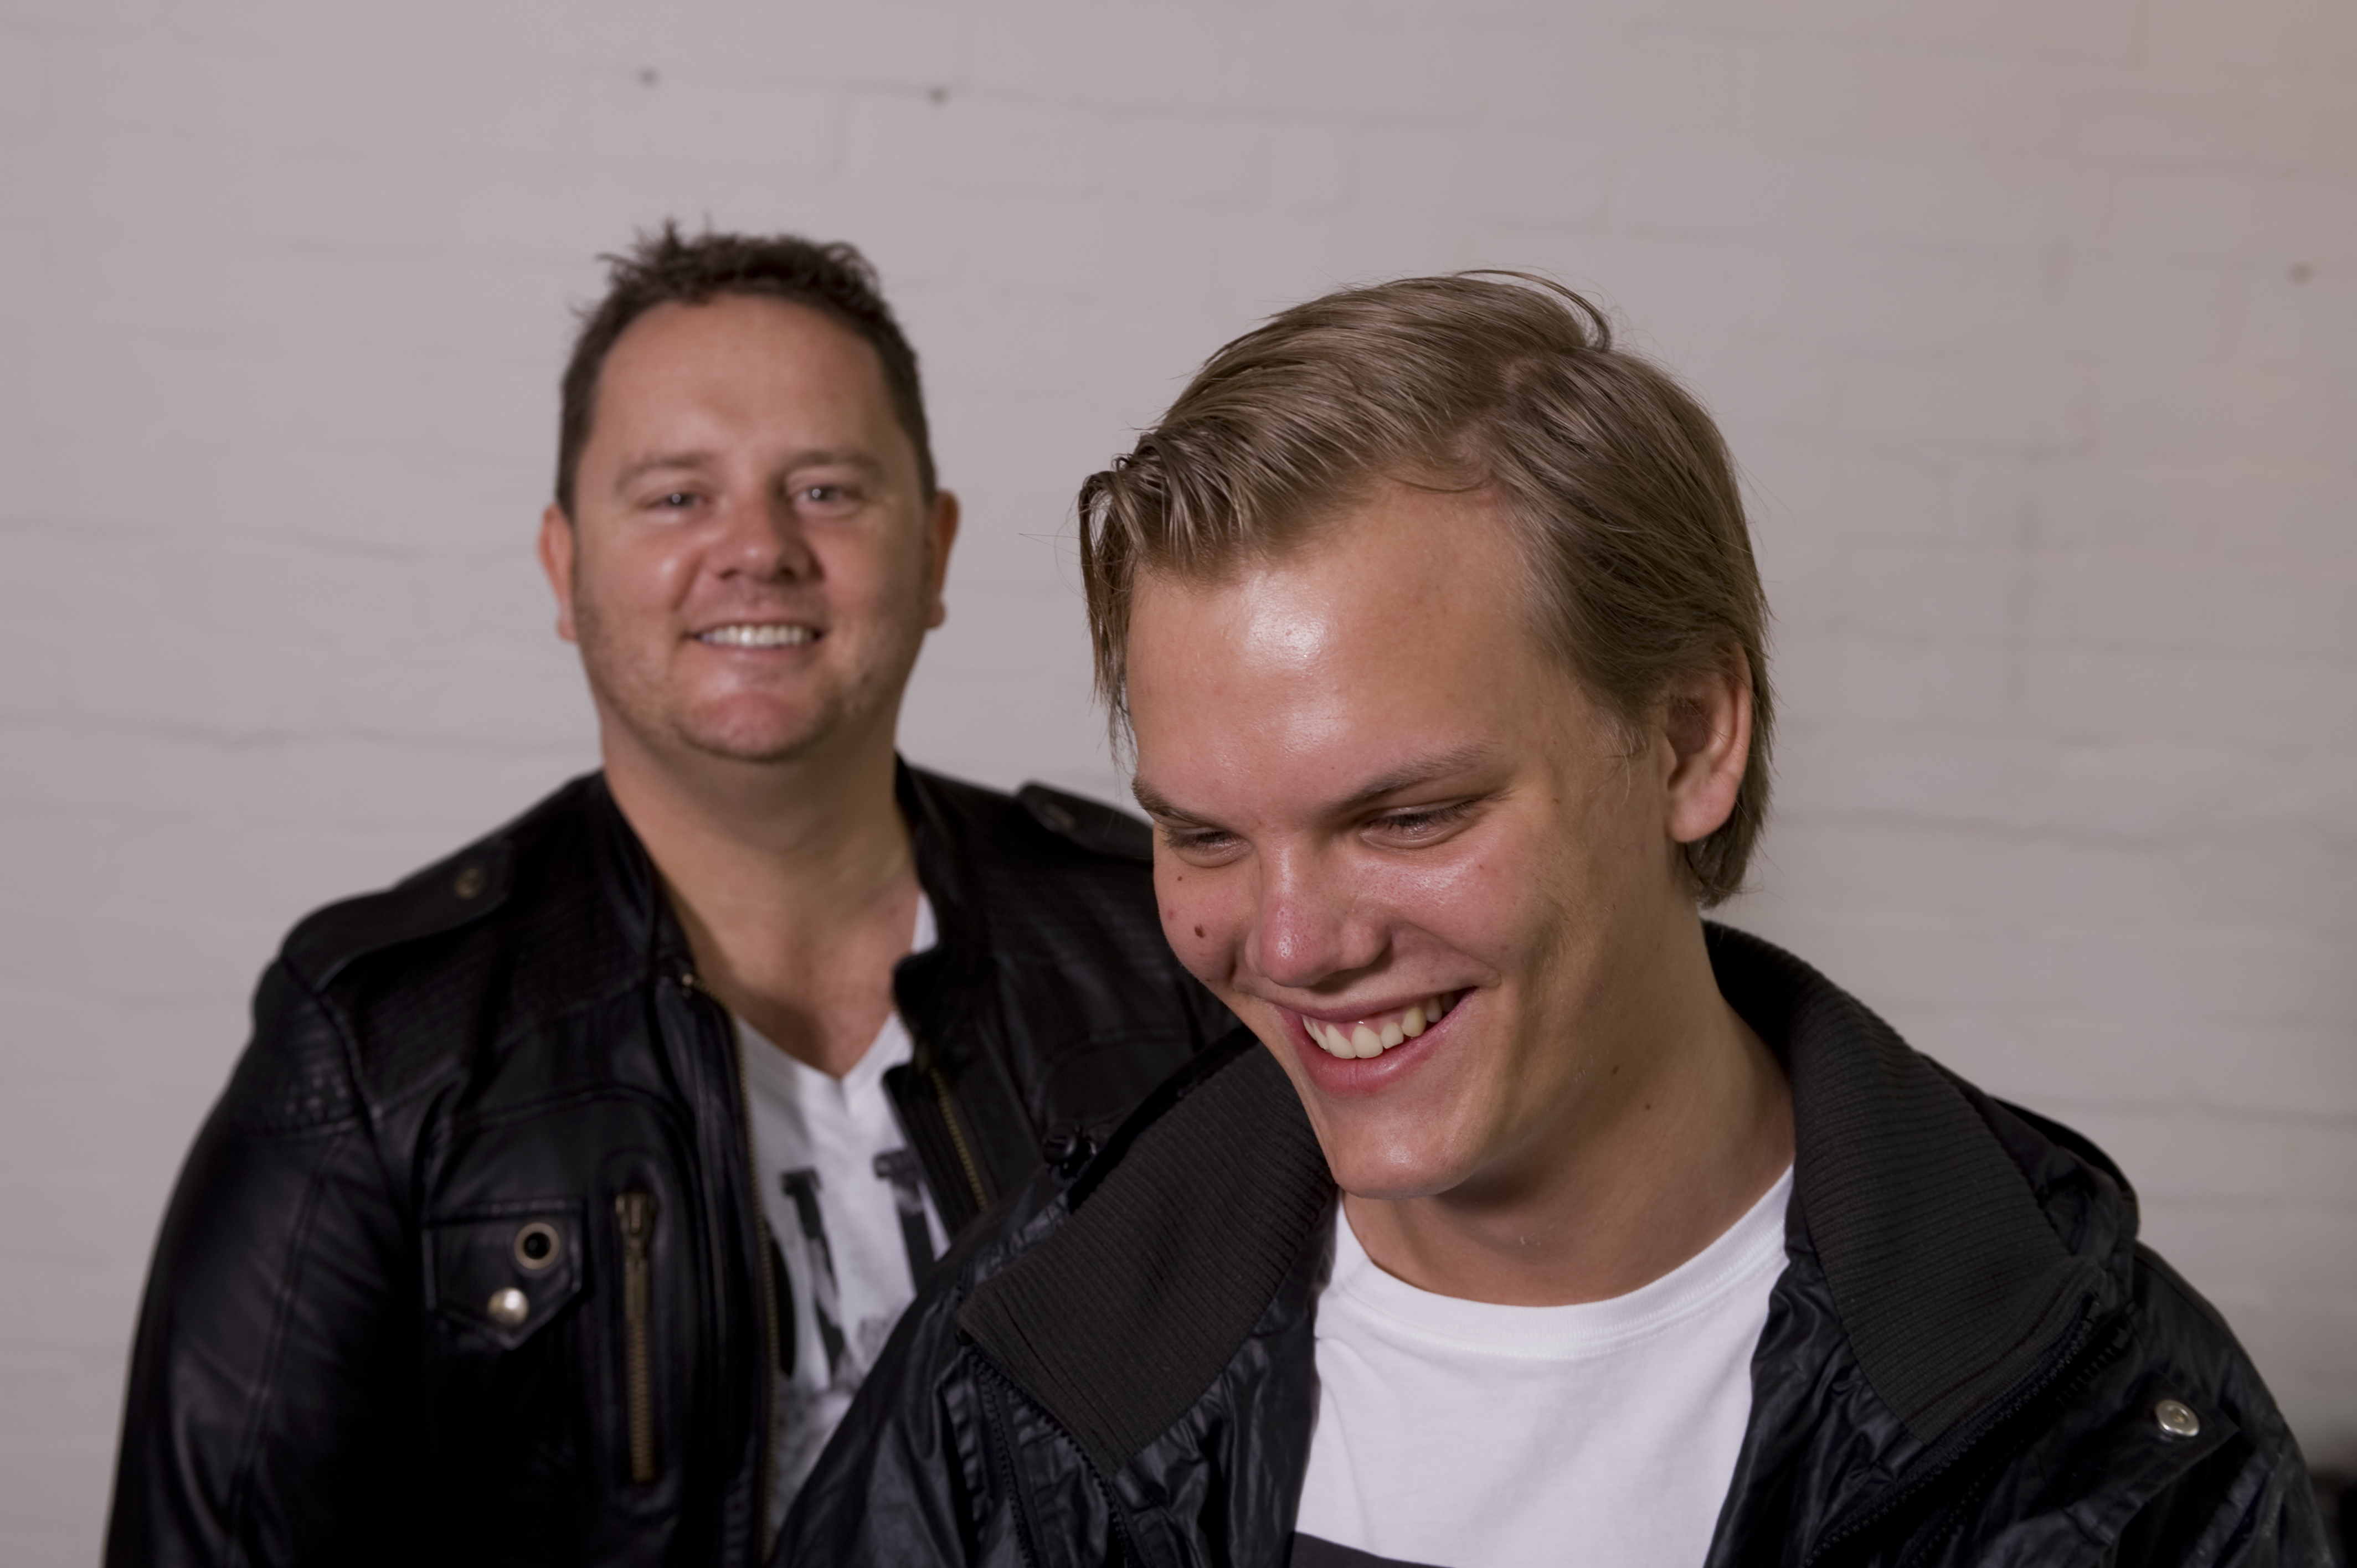 Vicious co-founder John Course and a young Avicii on Avicii’s his first Australian Tour to promote his releases with Vicious and prior to the release of “Levels” which propelled him to superstar status.jpeg